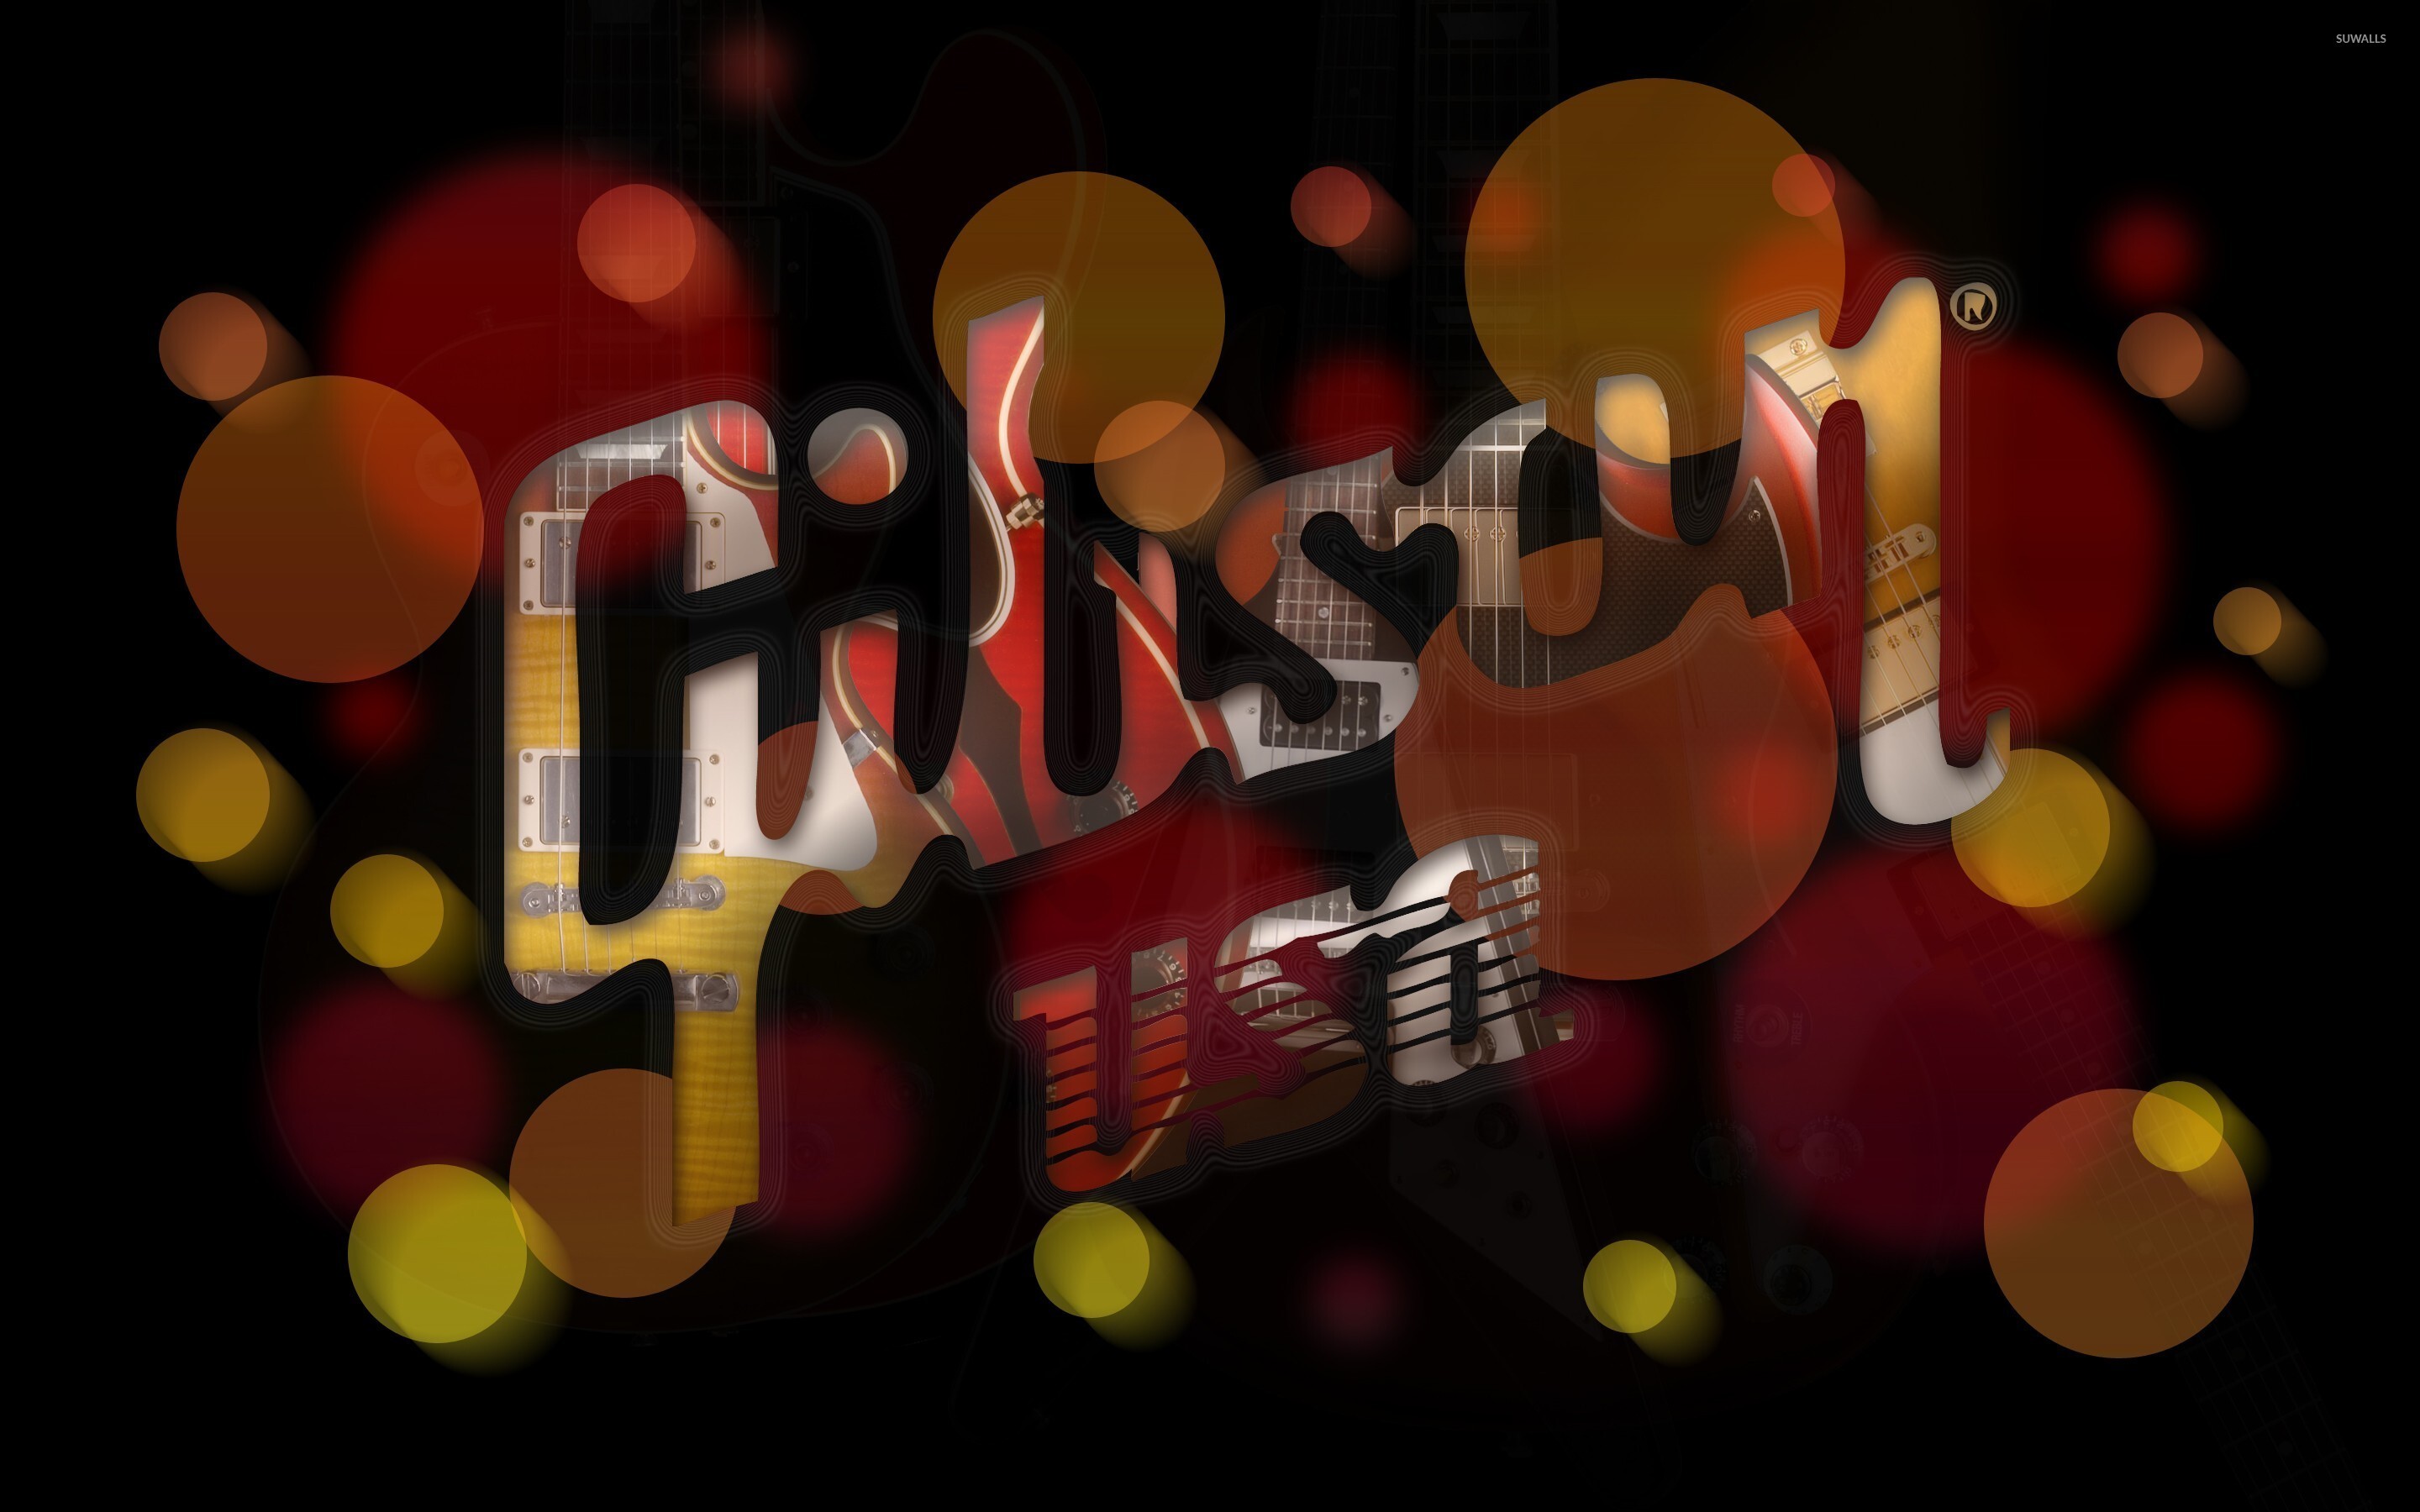 Gibson Guitar: An American Manufacturer Of Musical Instruments And Professional Audio Equipment. 2880x1800 HD Background.